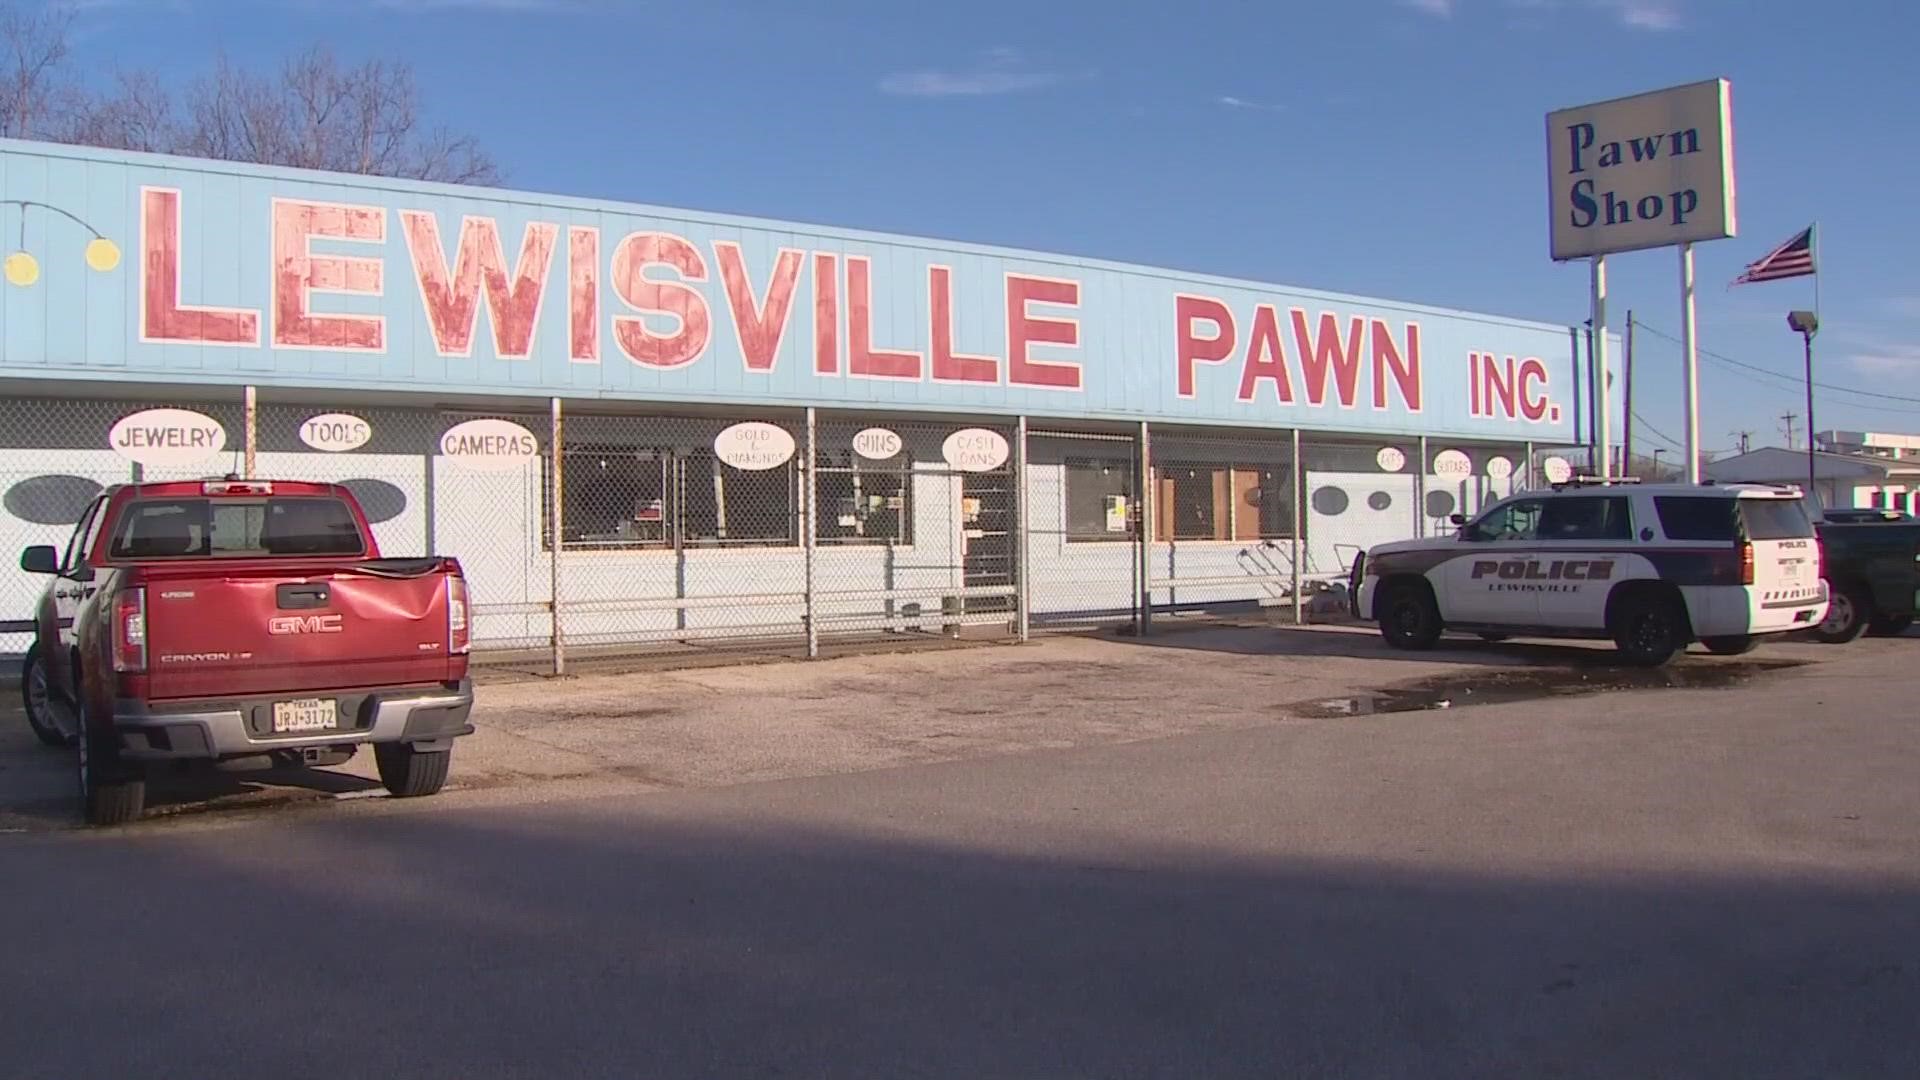 The shooting happened around 9:30 a.m. on Feb. 14 at the Lewisville Pawn Shop at 962 S. Mill St., police said.